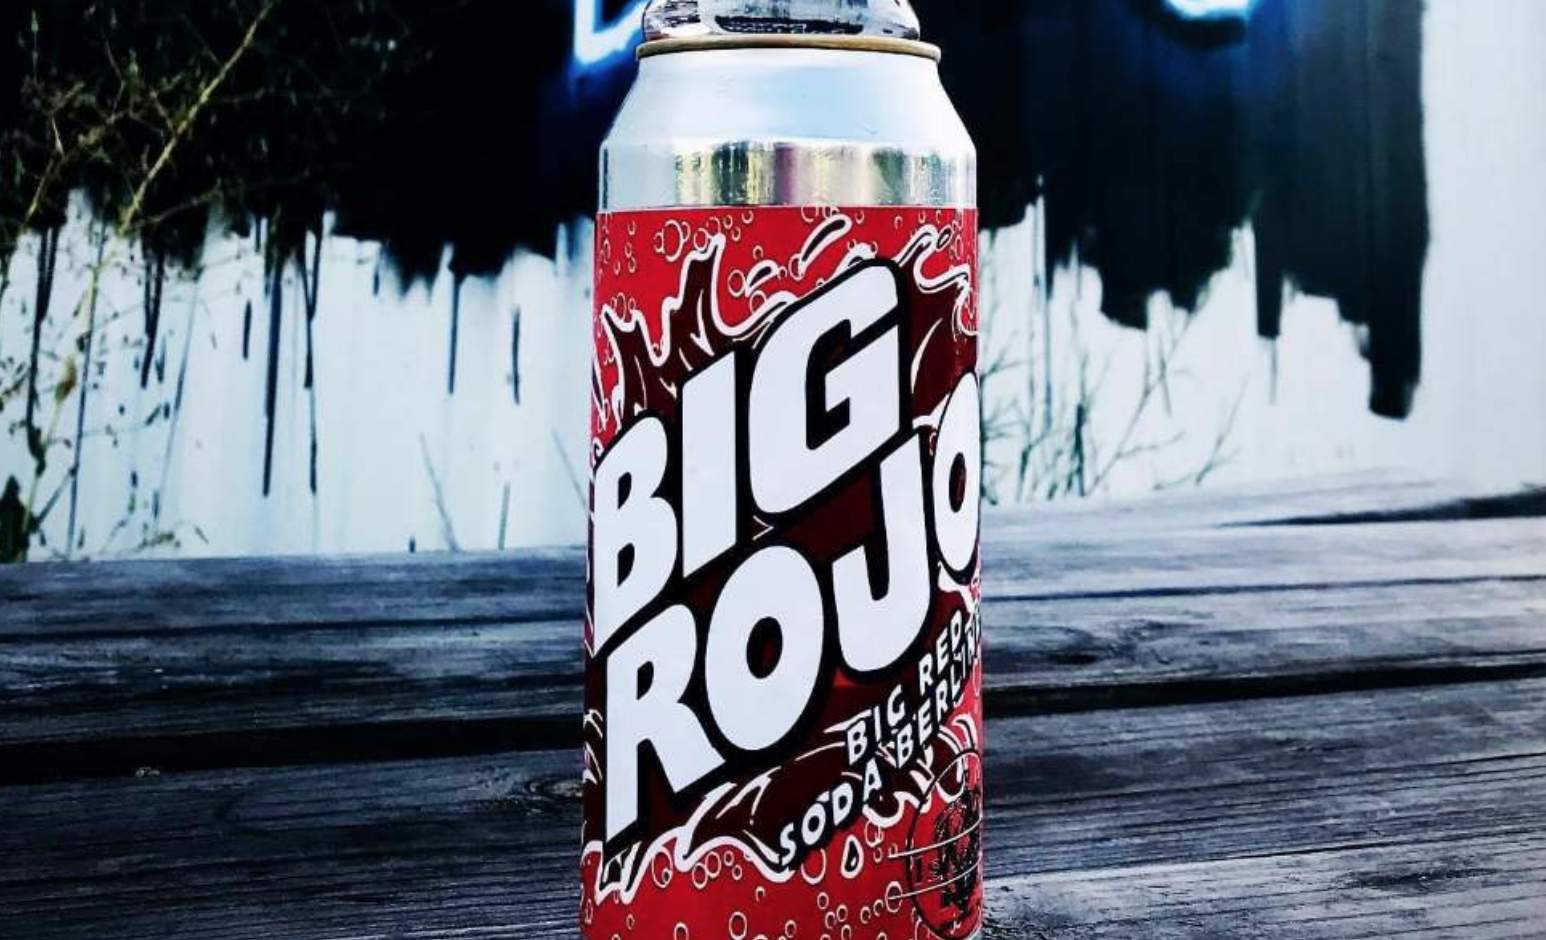 Are you a Big Red fan? Then you may love their new flavored beer that a Texas brewing company is releasing